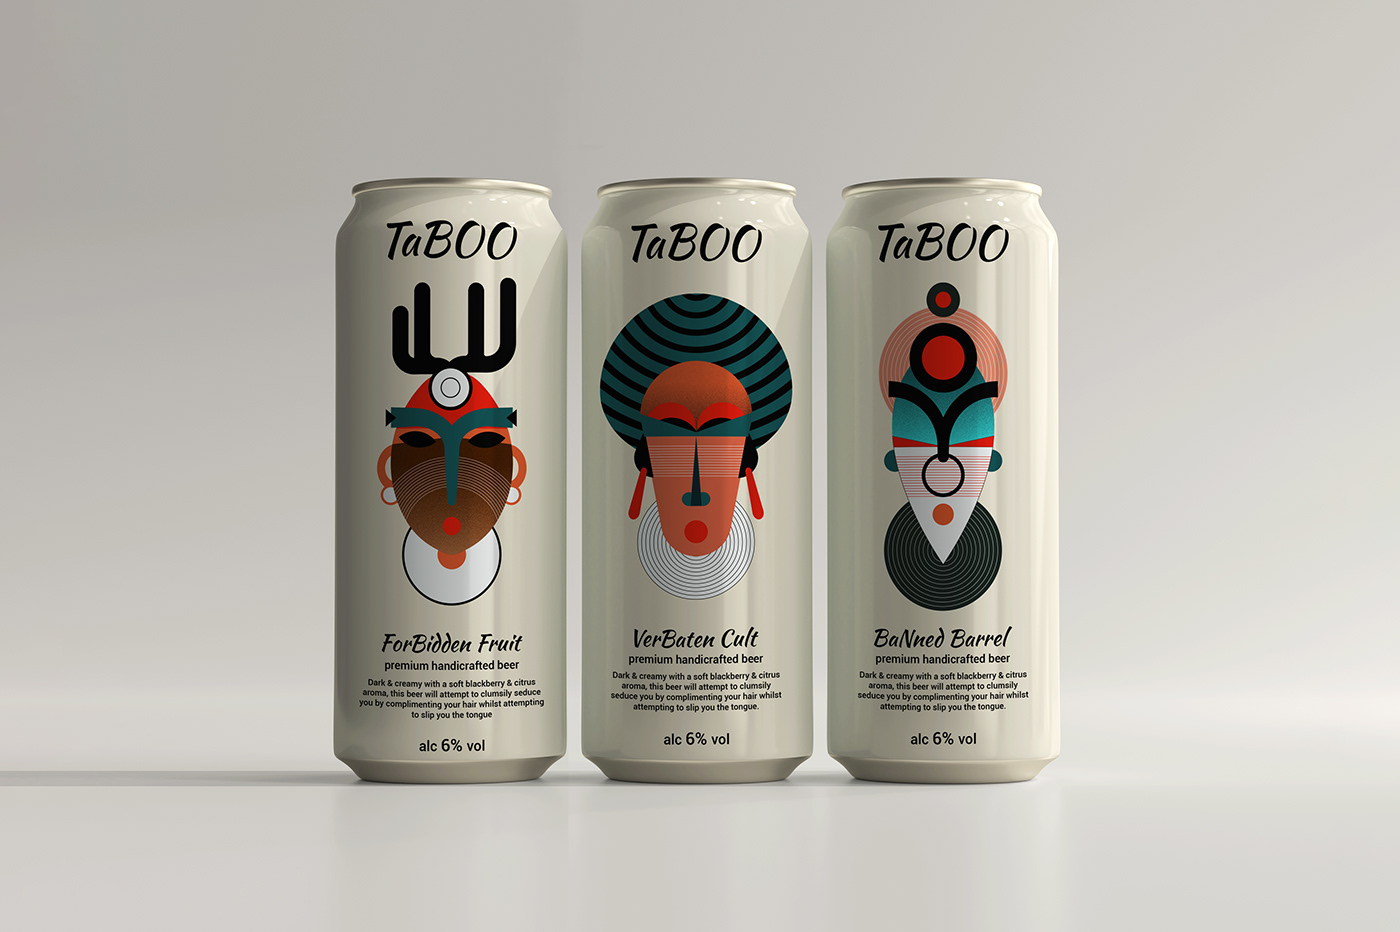 Taboo Indian Pale Ale is a fresh, tropical session IPA.